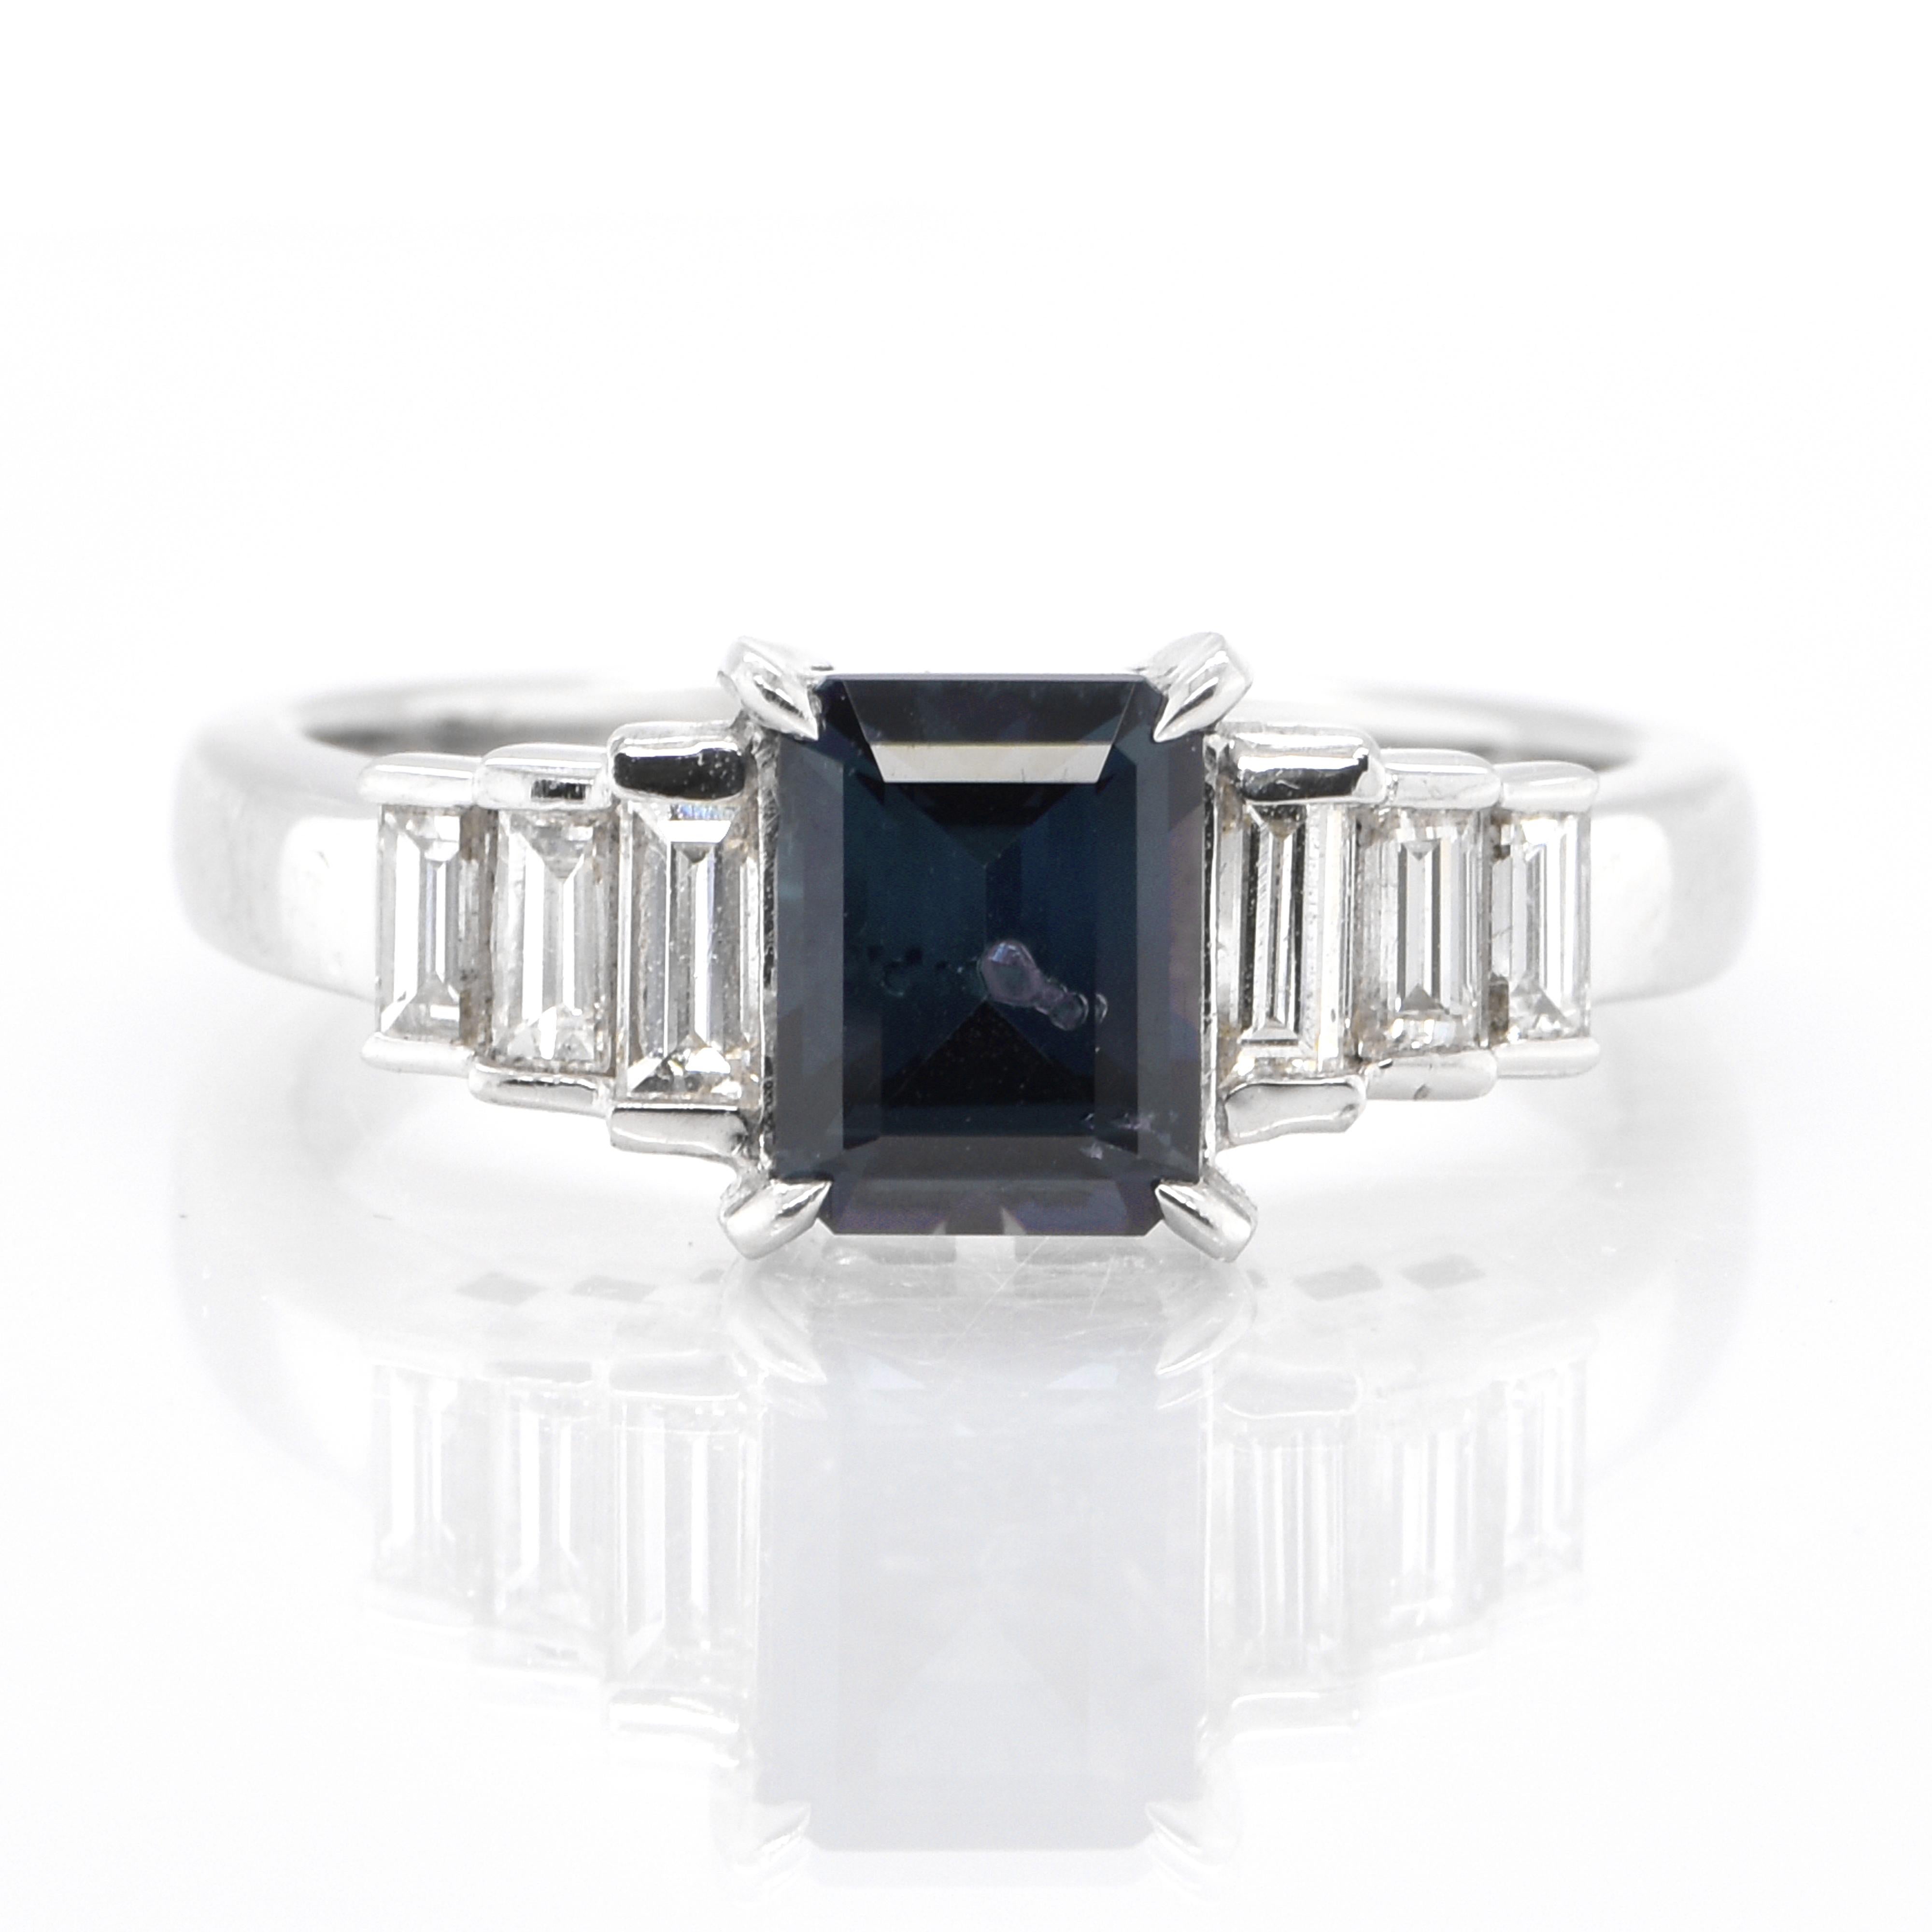 A gorgeous Ring featuring a CGL Certified Carat, Natural Alexandrite and 0.46 Carats of Diamond Accents set in Platinum. Alexandrites produce a natural color-change phenomenon as they exhibit a Bluish Green Color under Fluorescent Light whereas a